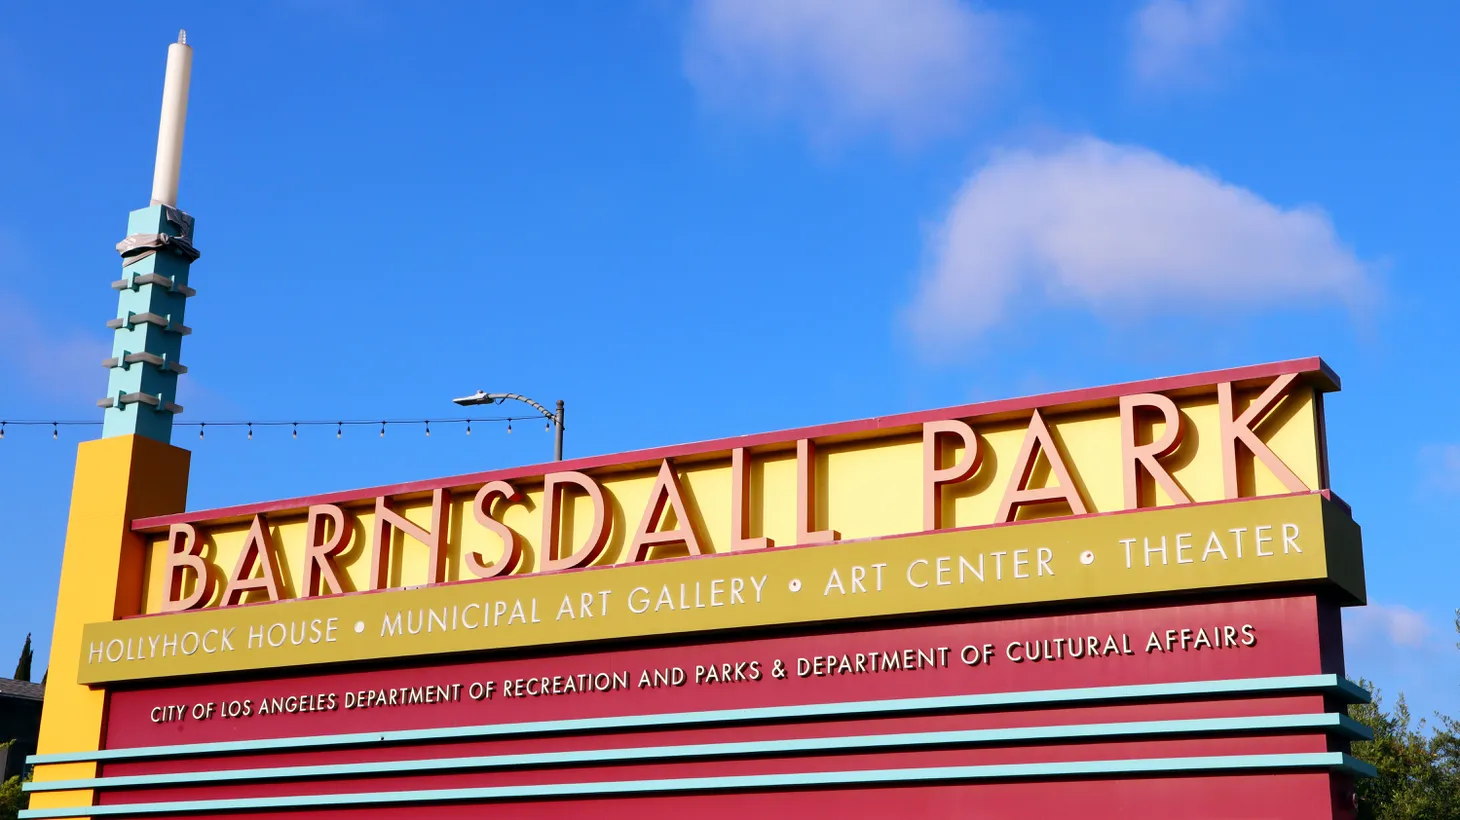 The Los Angeles Municipal Art Gallery at Barnsdall Art Park is one of the city’s longest-running art spaces.